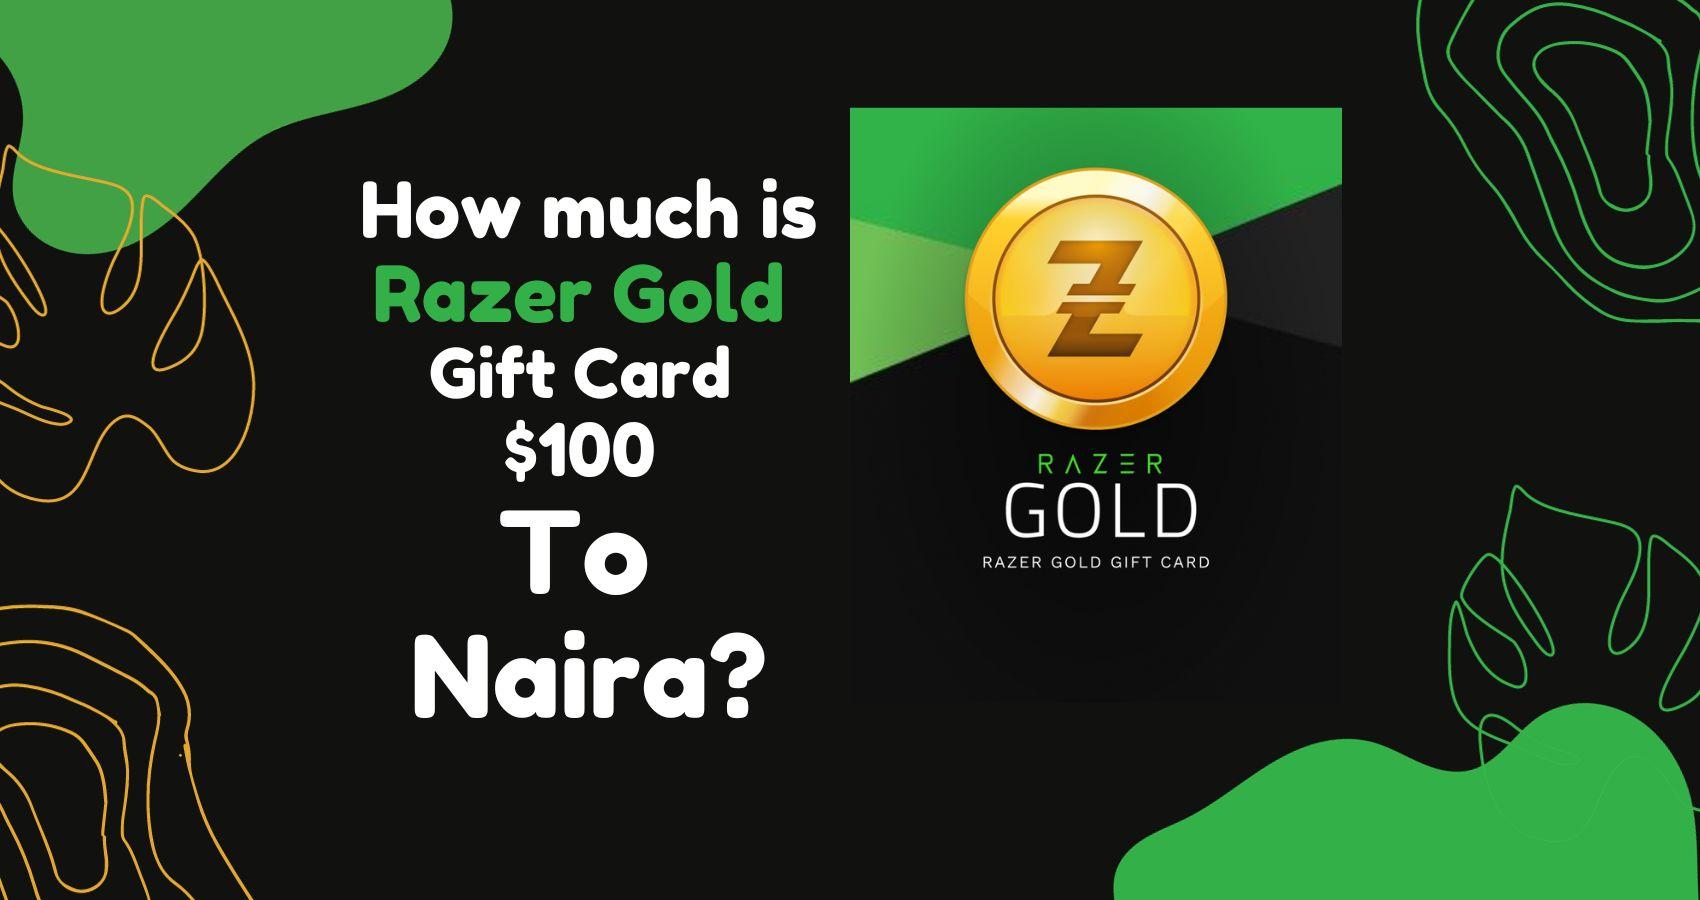 How Much Is Razer Gold Gift Card $100 To Naira?